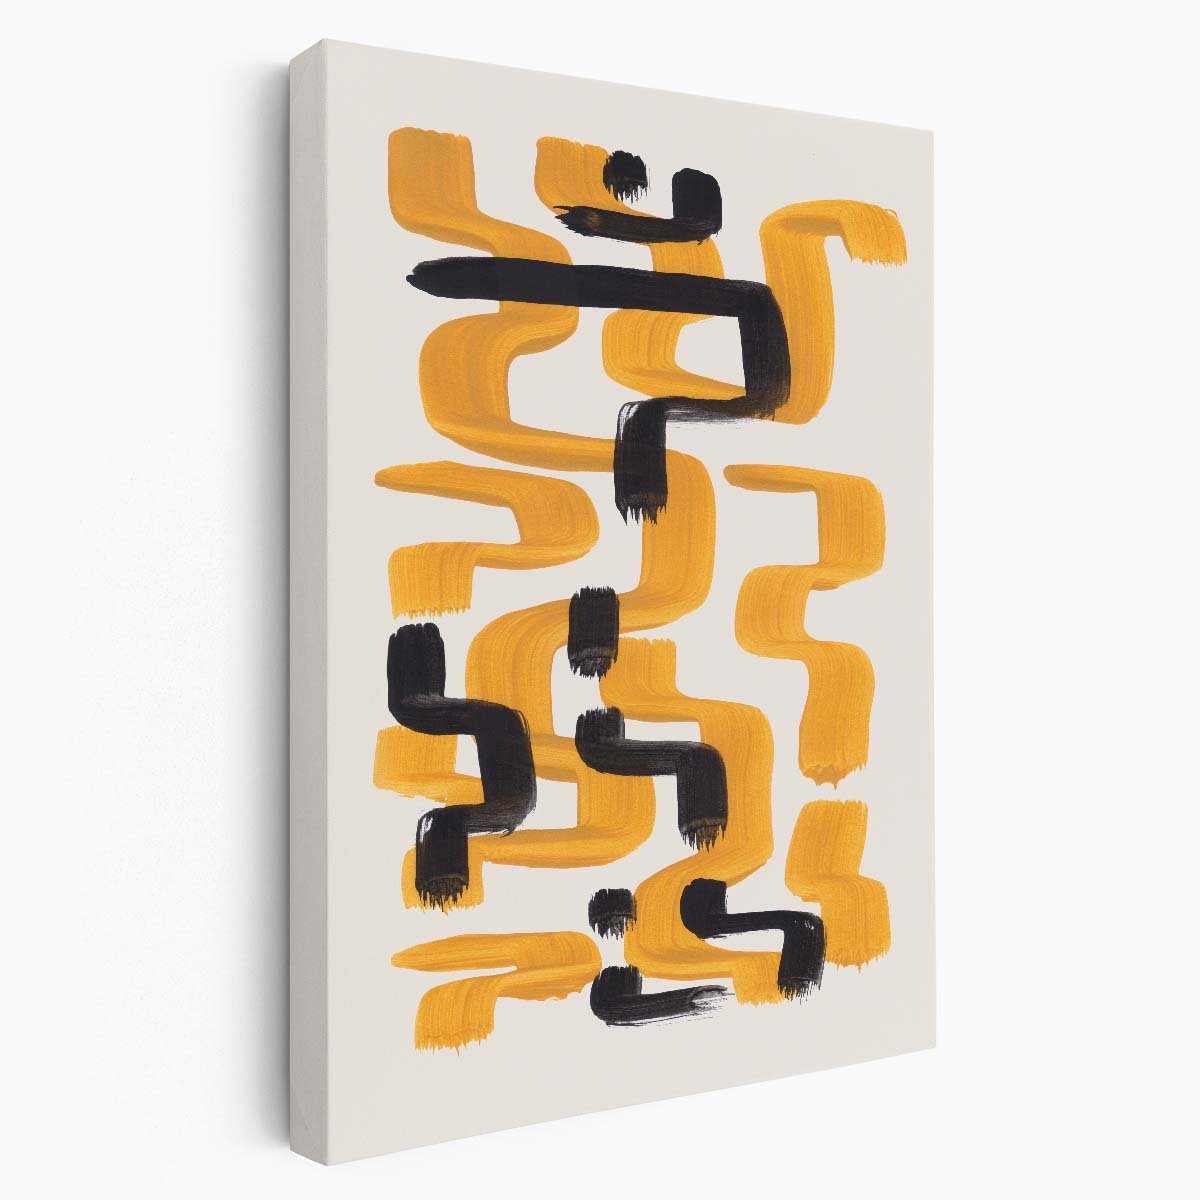 Geometric Mustard Yellow Abstract Illustration Poster with Bright Background by Luxuriance Designs, made in USA